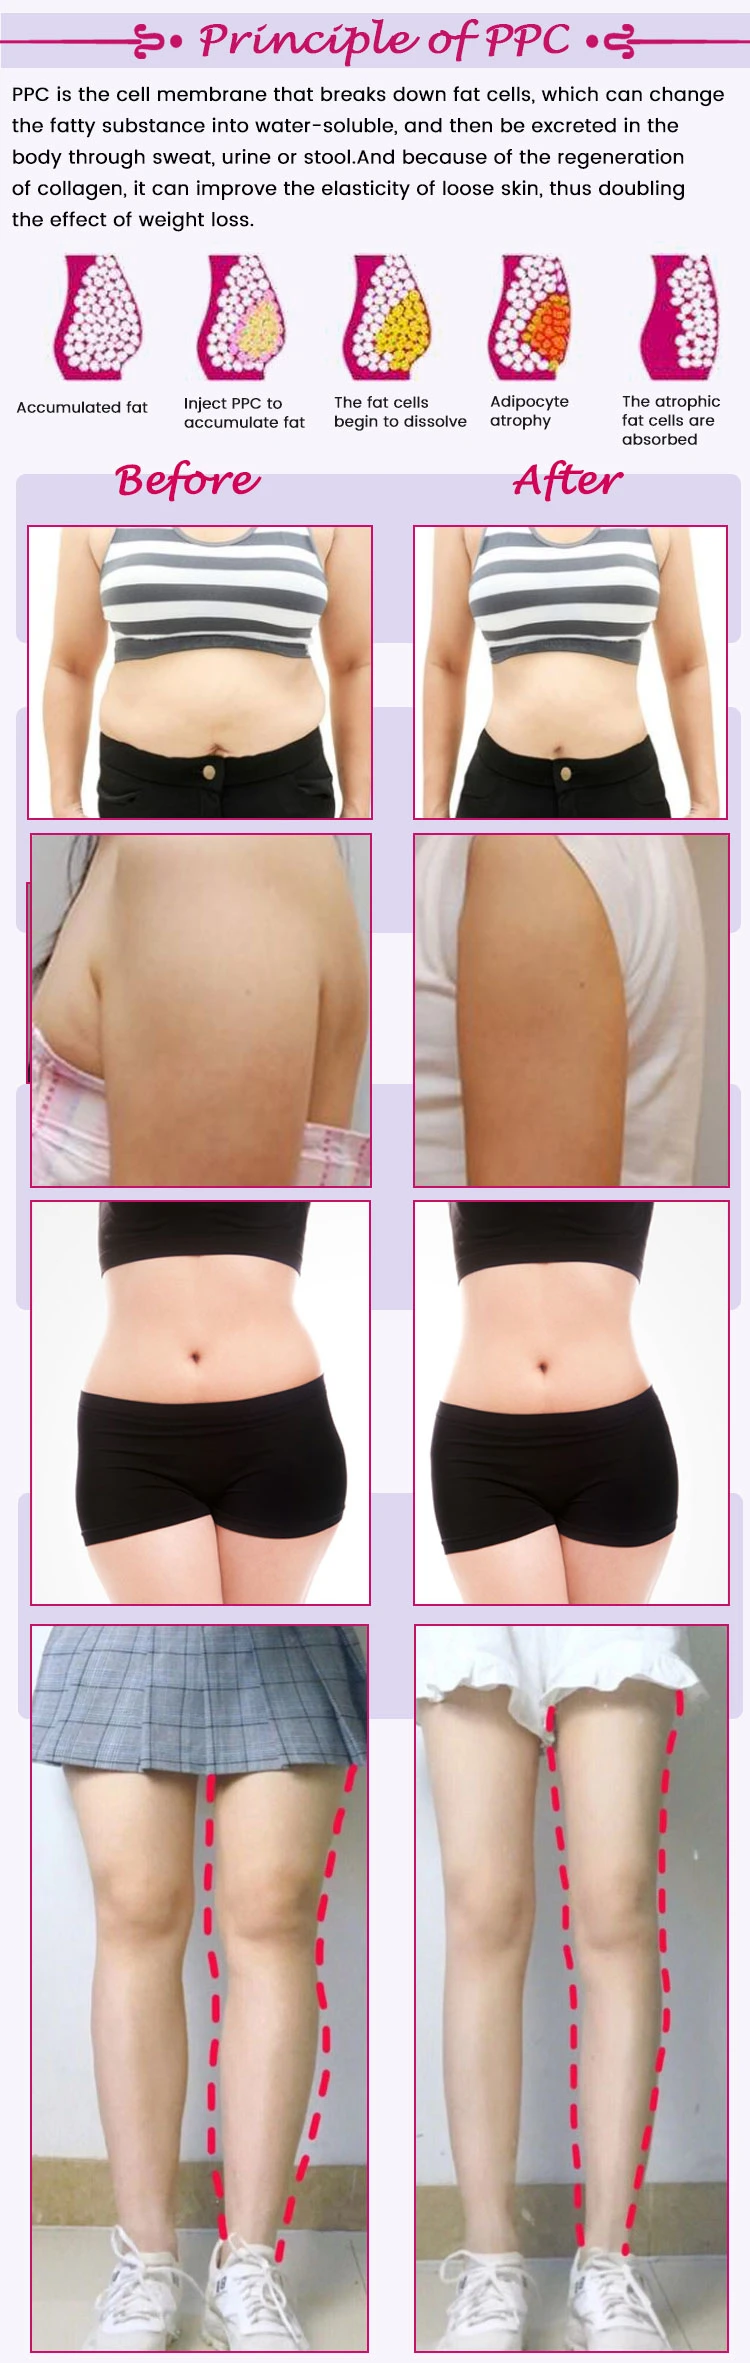 Mesotherapy Solution Injectable Red Lipolytic Injections for Melting Fat